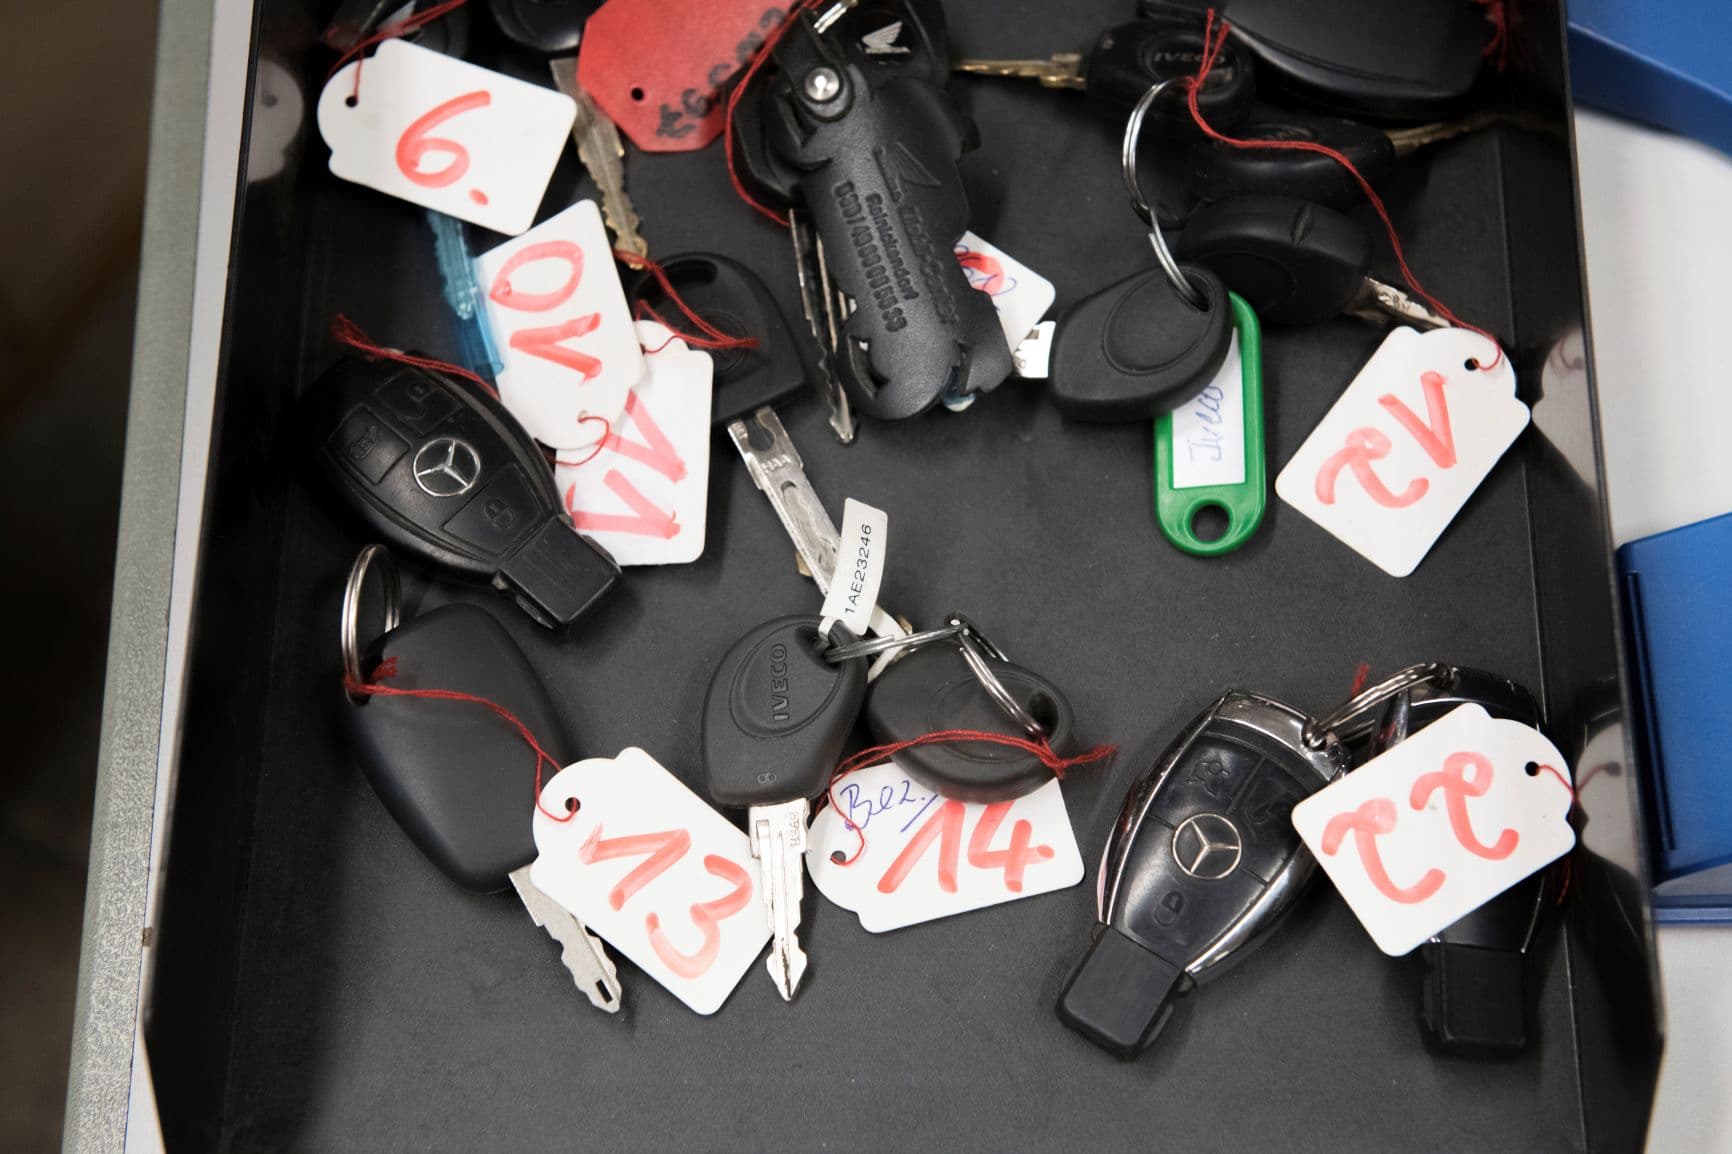 Refrigerating Car Keys Could Prevent Auto Theft